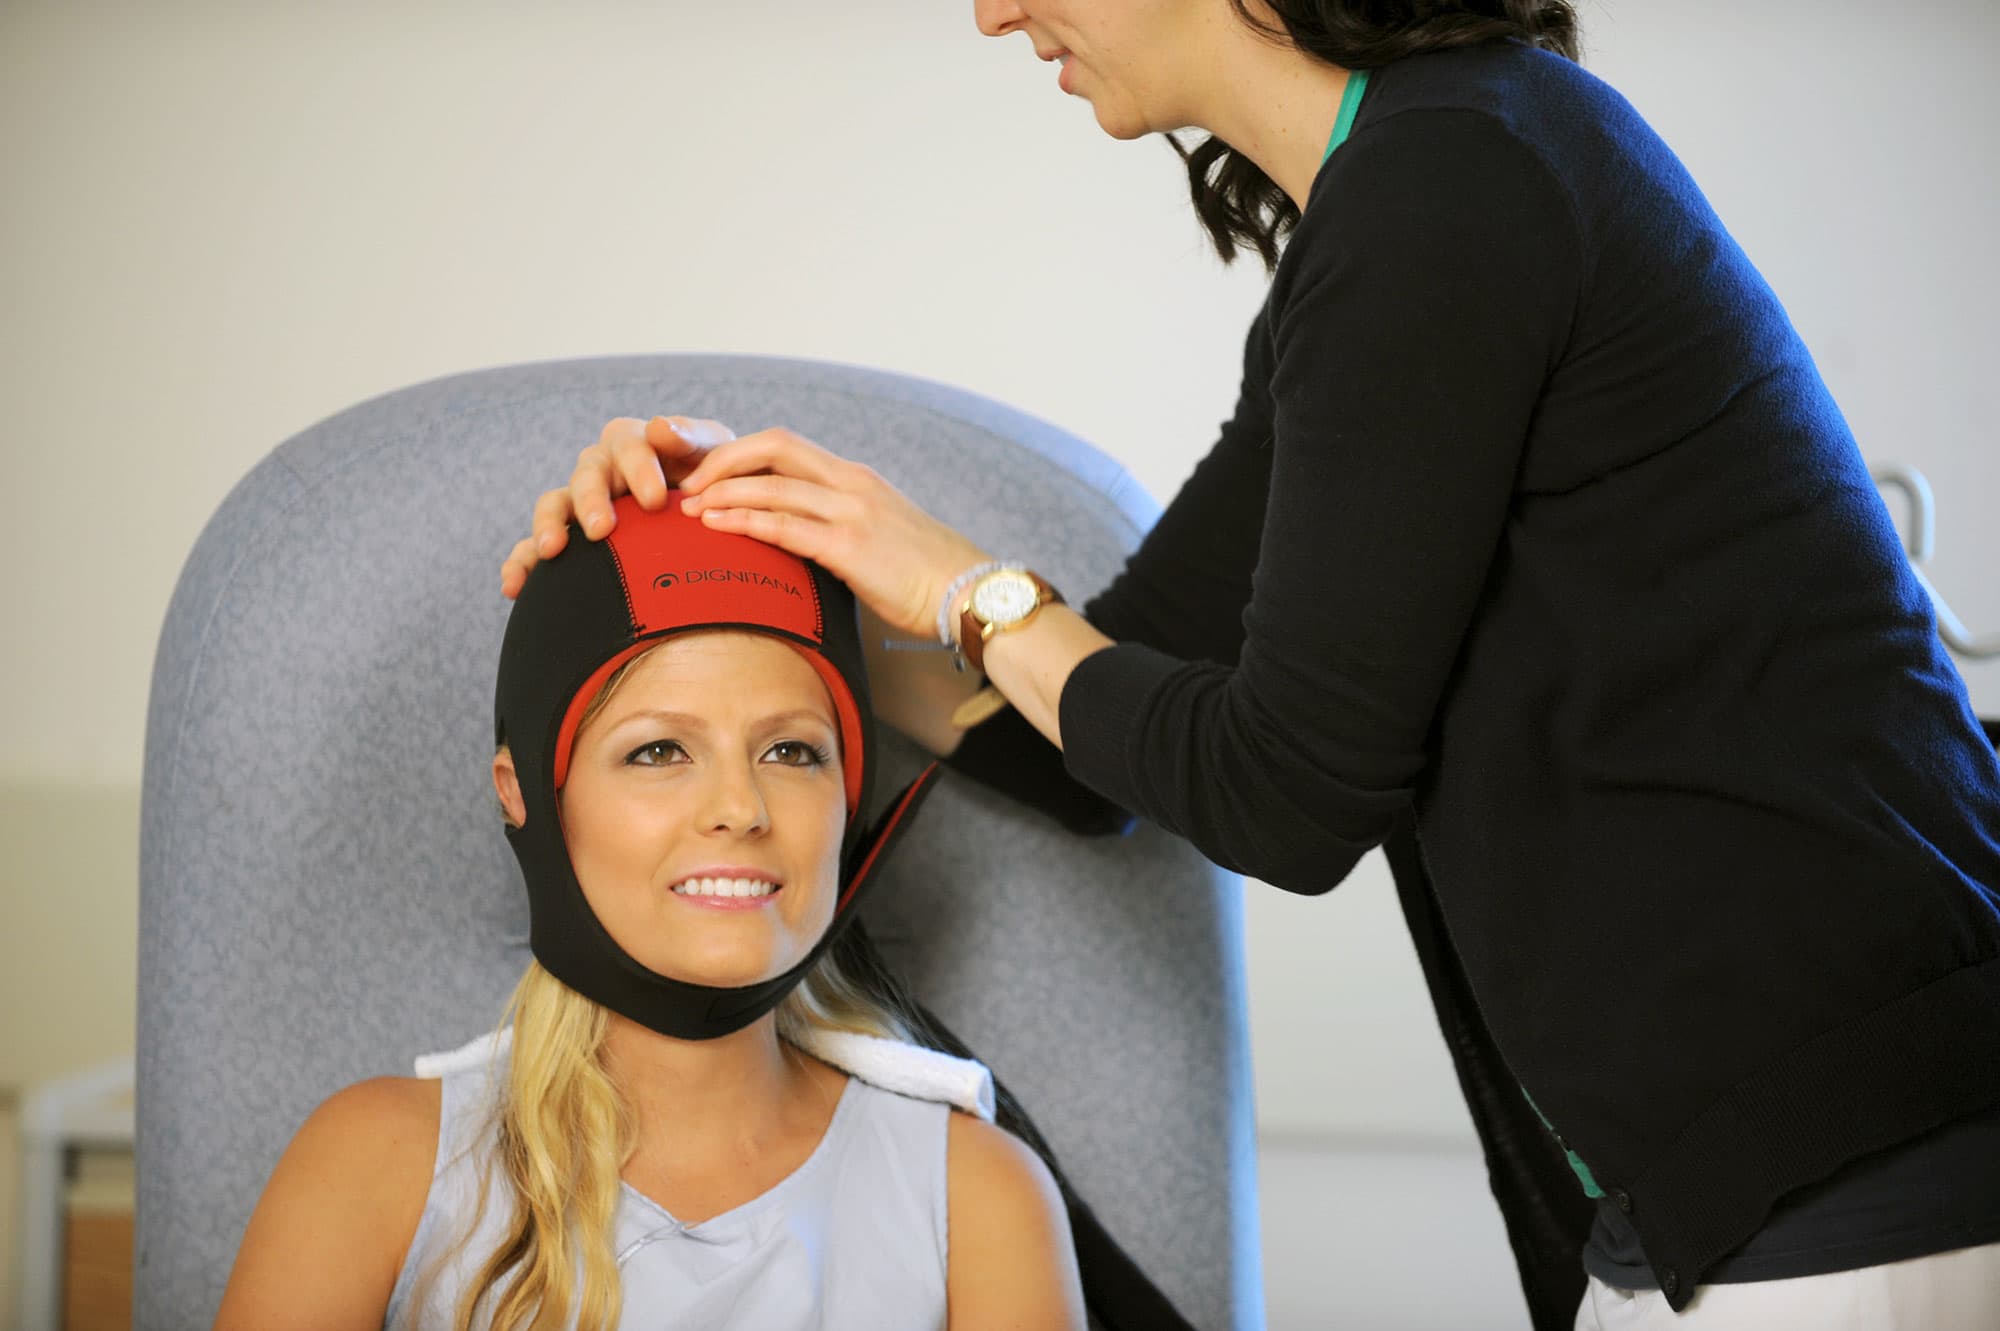 Cancer Center article: Hair Loss From Chemotherapy by Shannon Dorsey - Issuu